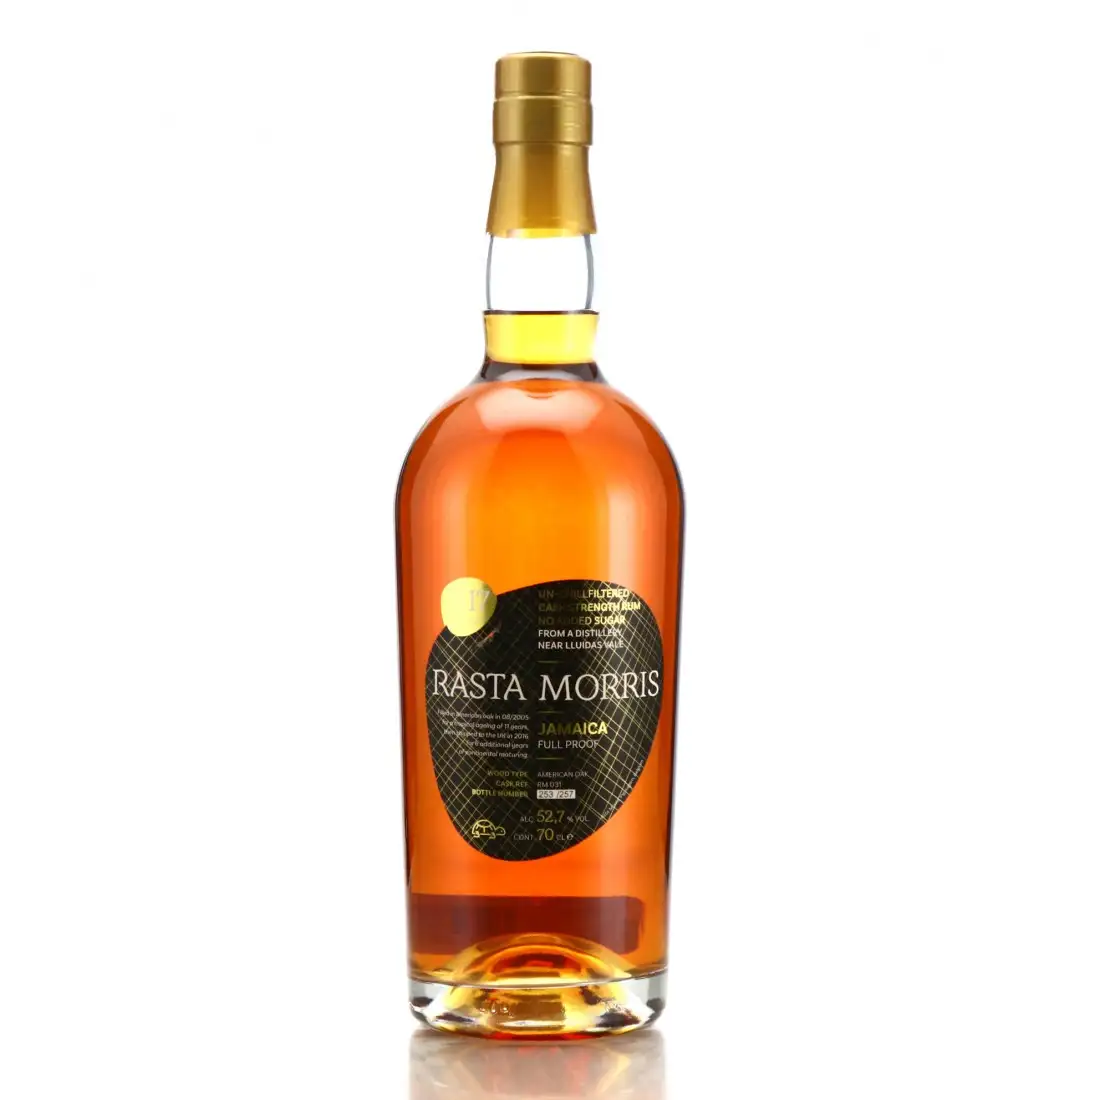 Image of the front of the bottle of the rum Rasta Morris Jamaica